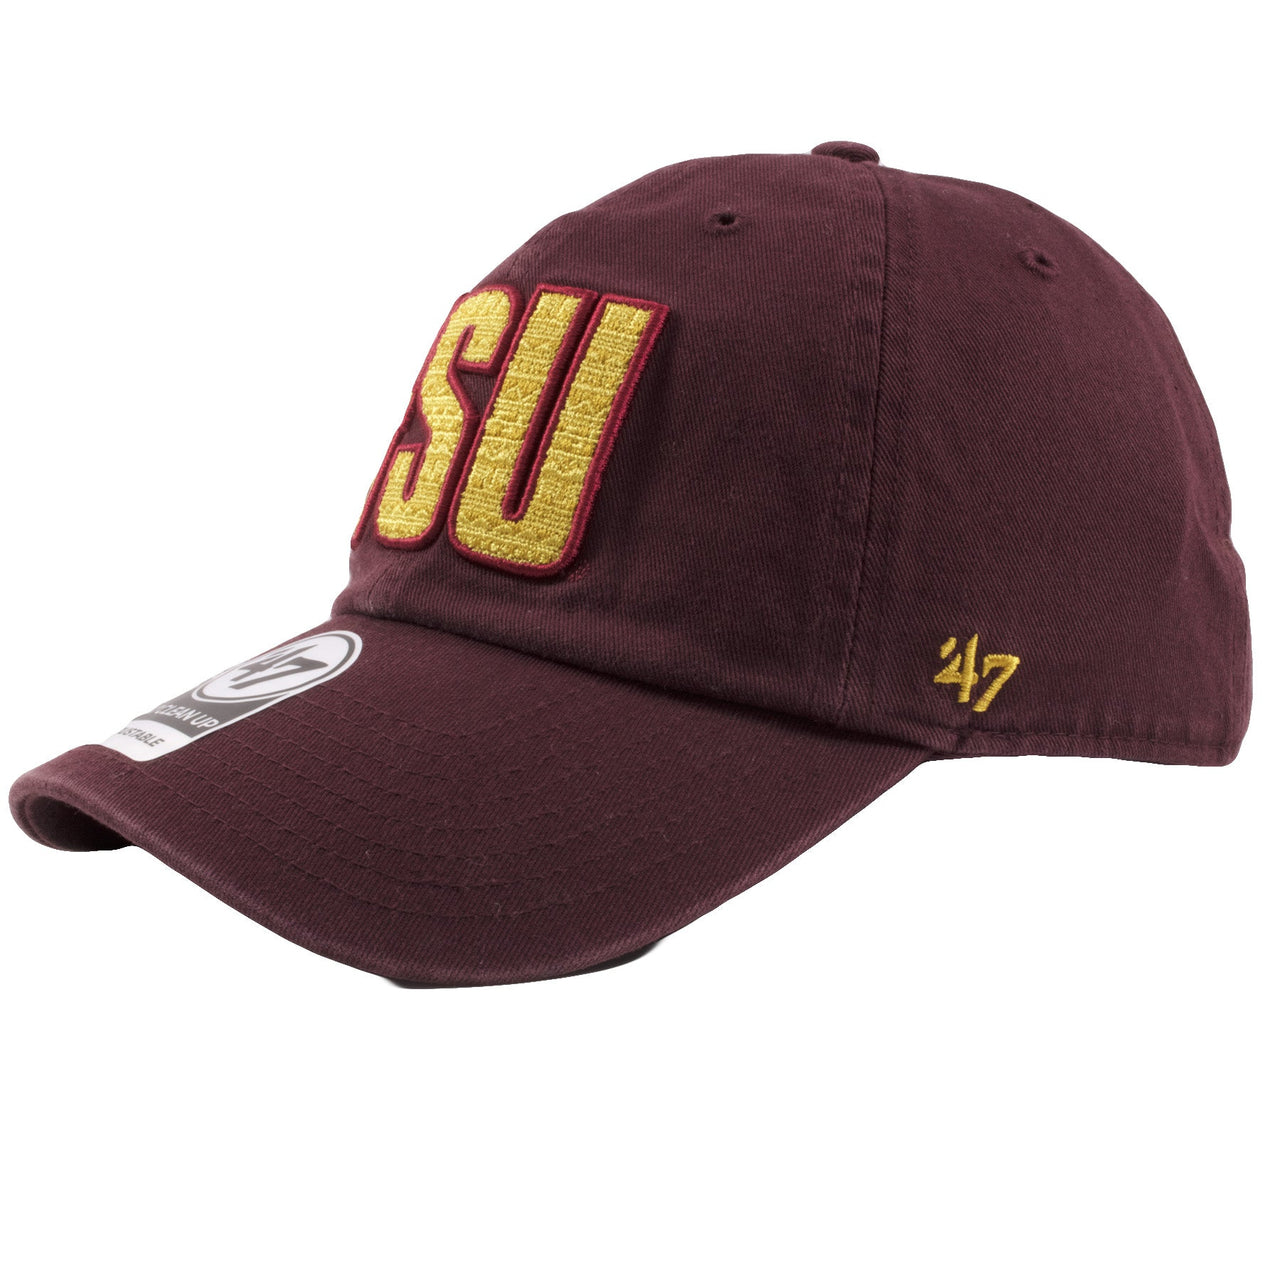 On the left side of the FSU maroon adjustable dad hat is the '47 logo embroidered in gold